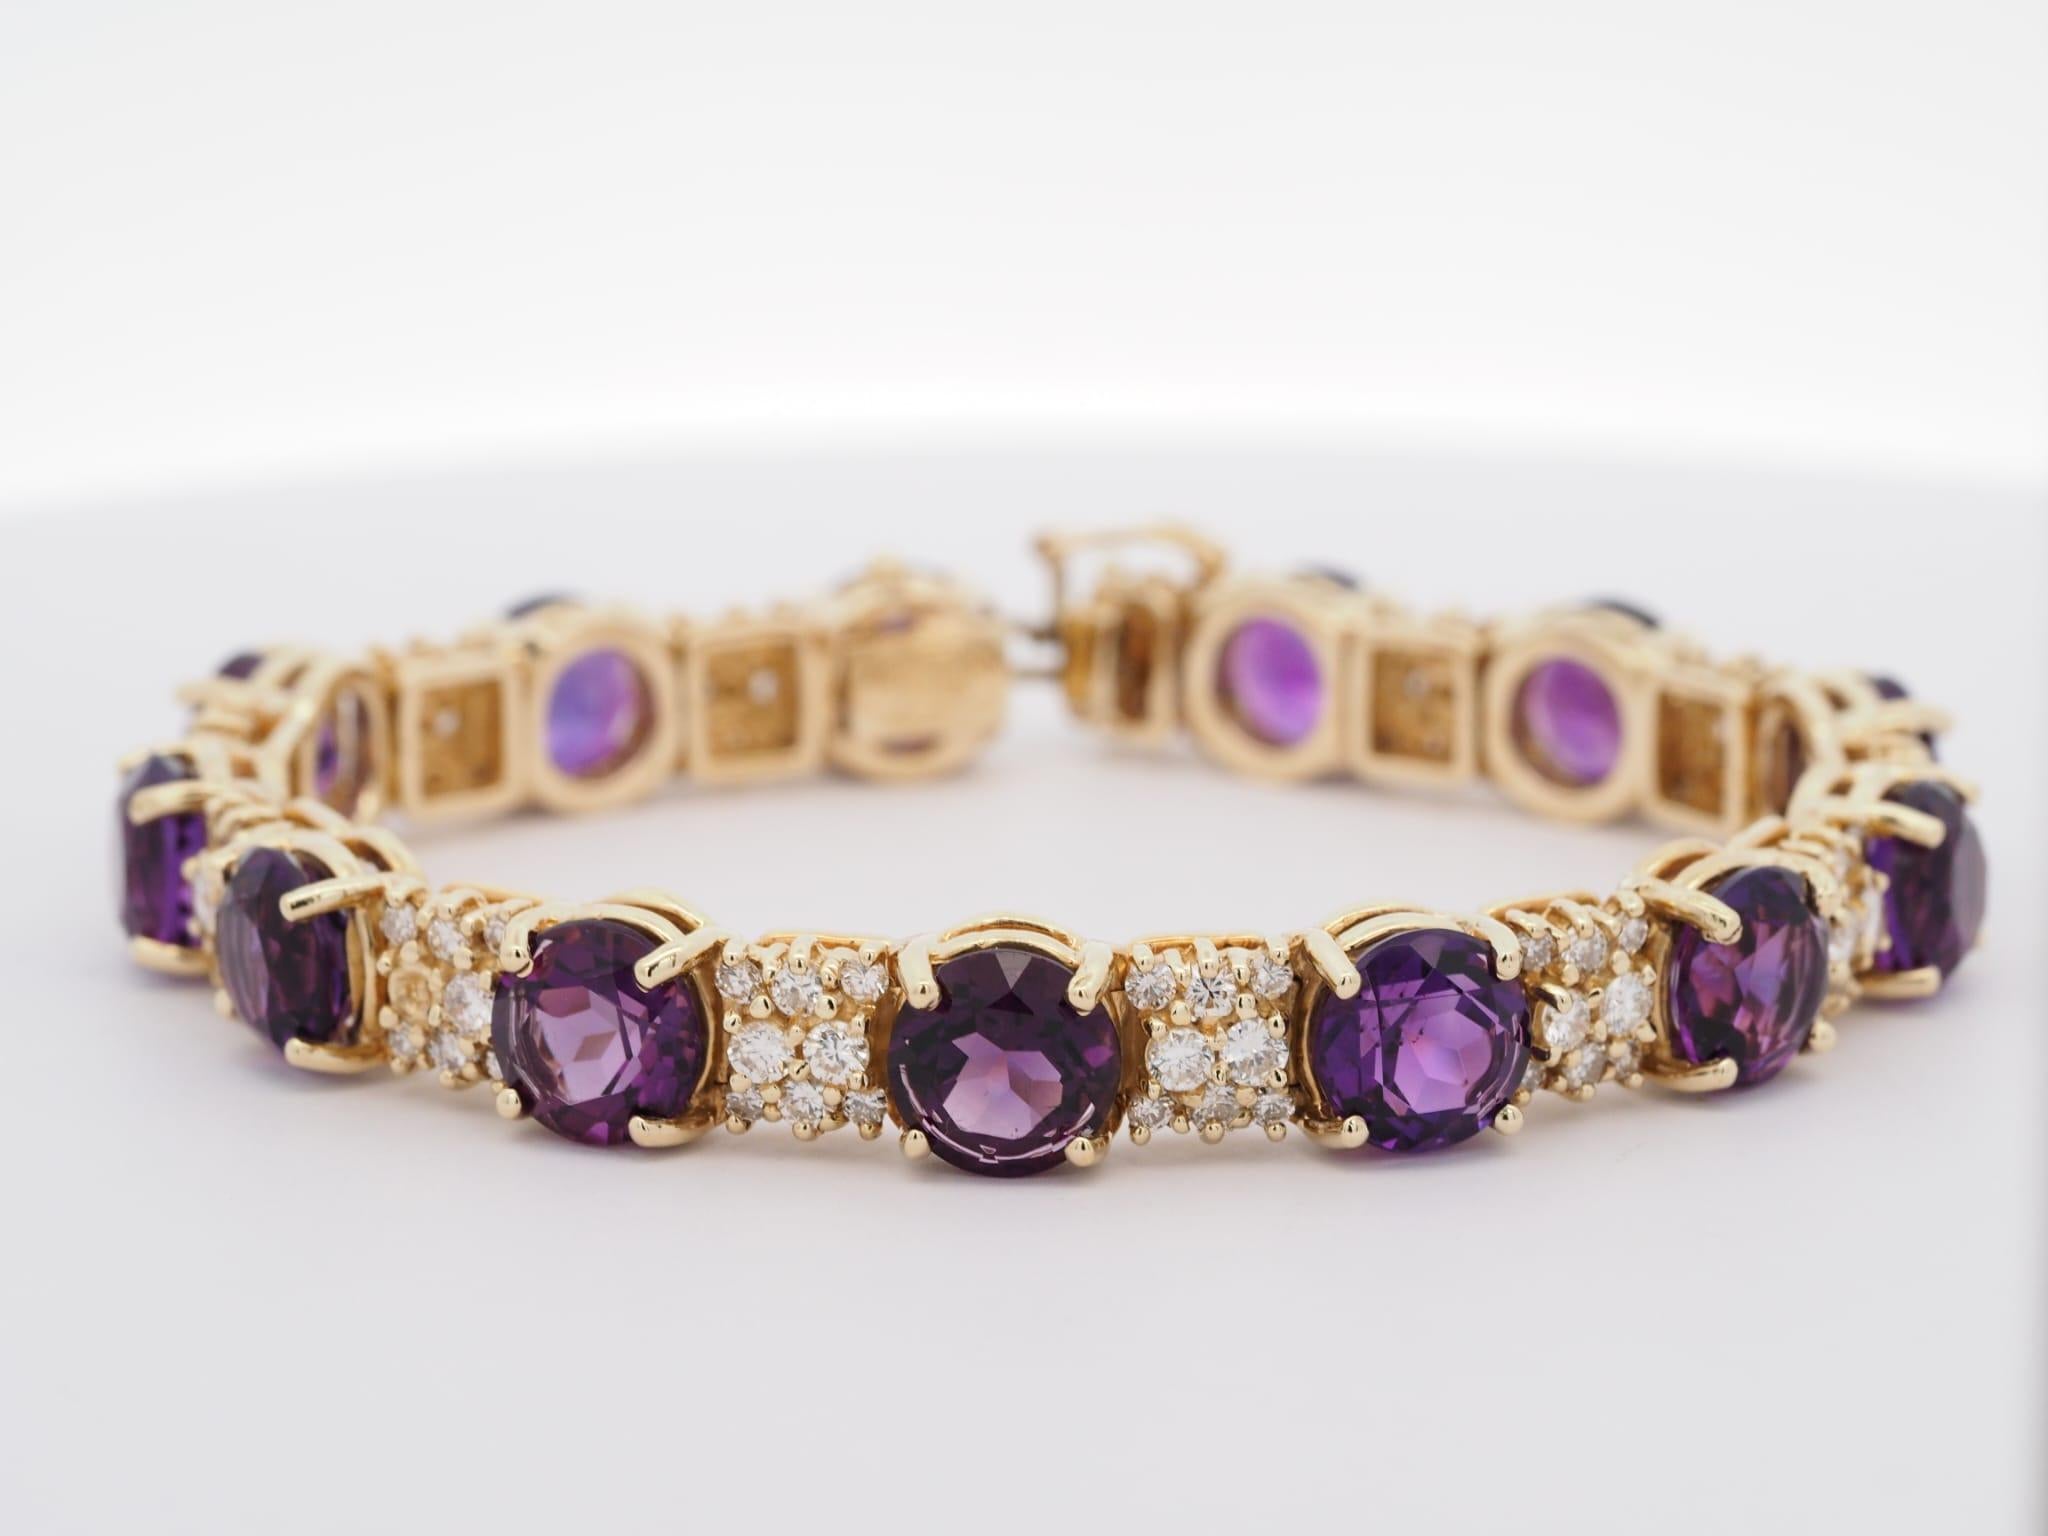 La Triomphe 18K Yellow Gold 20 ct Amethyst & 4 ct Diamond Bracelet In Good Condition For Sale In Addison, TX